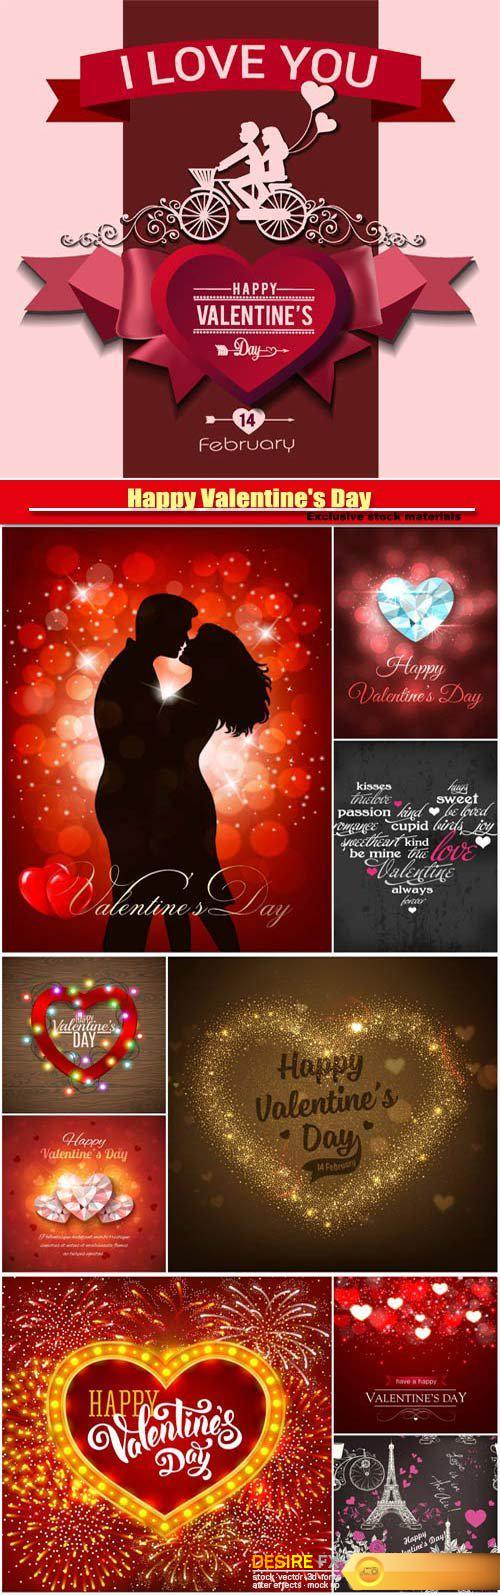 Happy Valentines Day vector, red hearts, romance, love